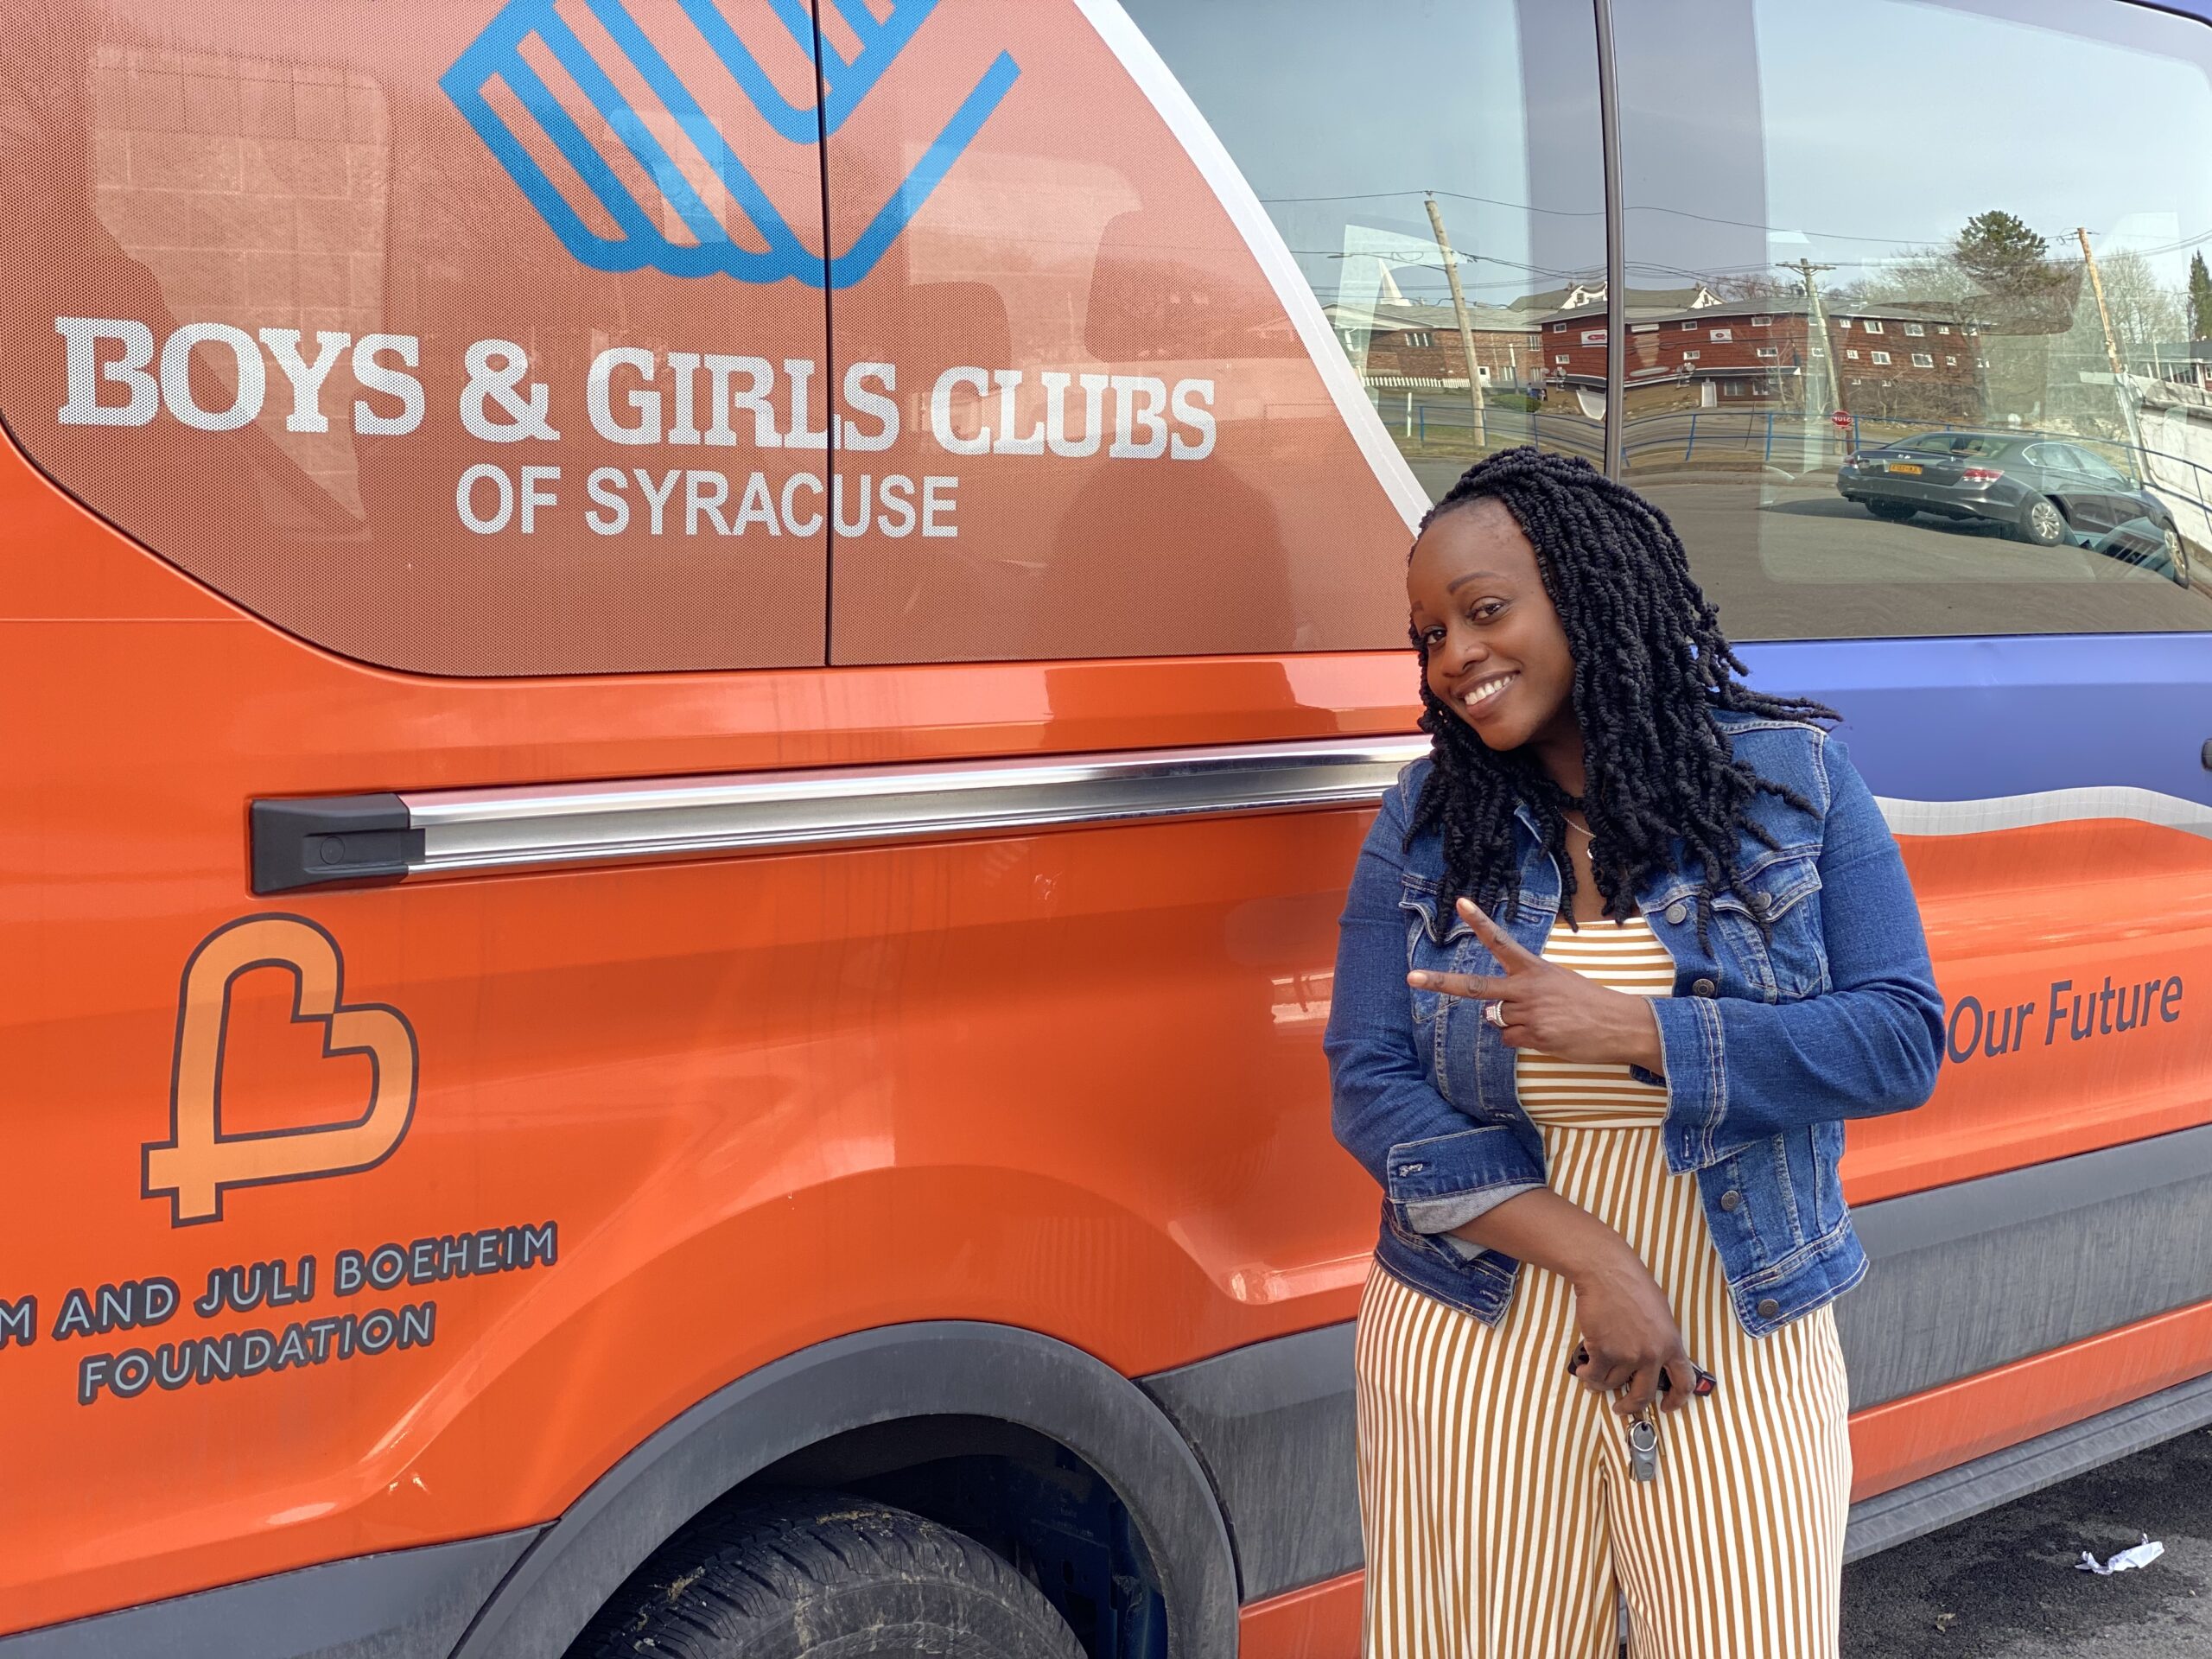 African American Woman standing in front of a blue and orange colored Boys & Girls Club Truck